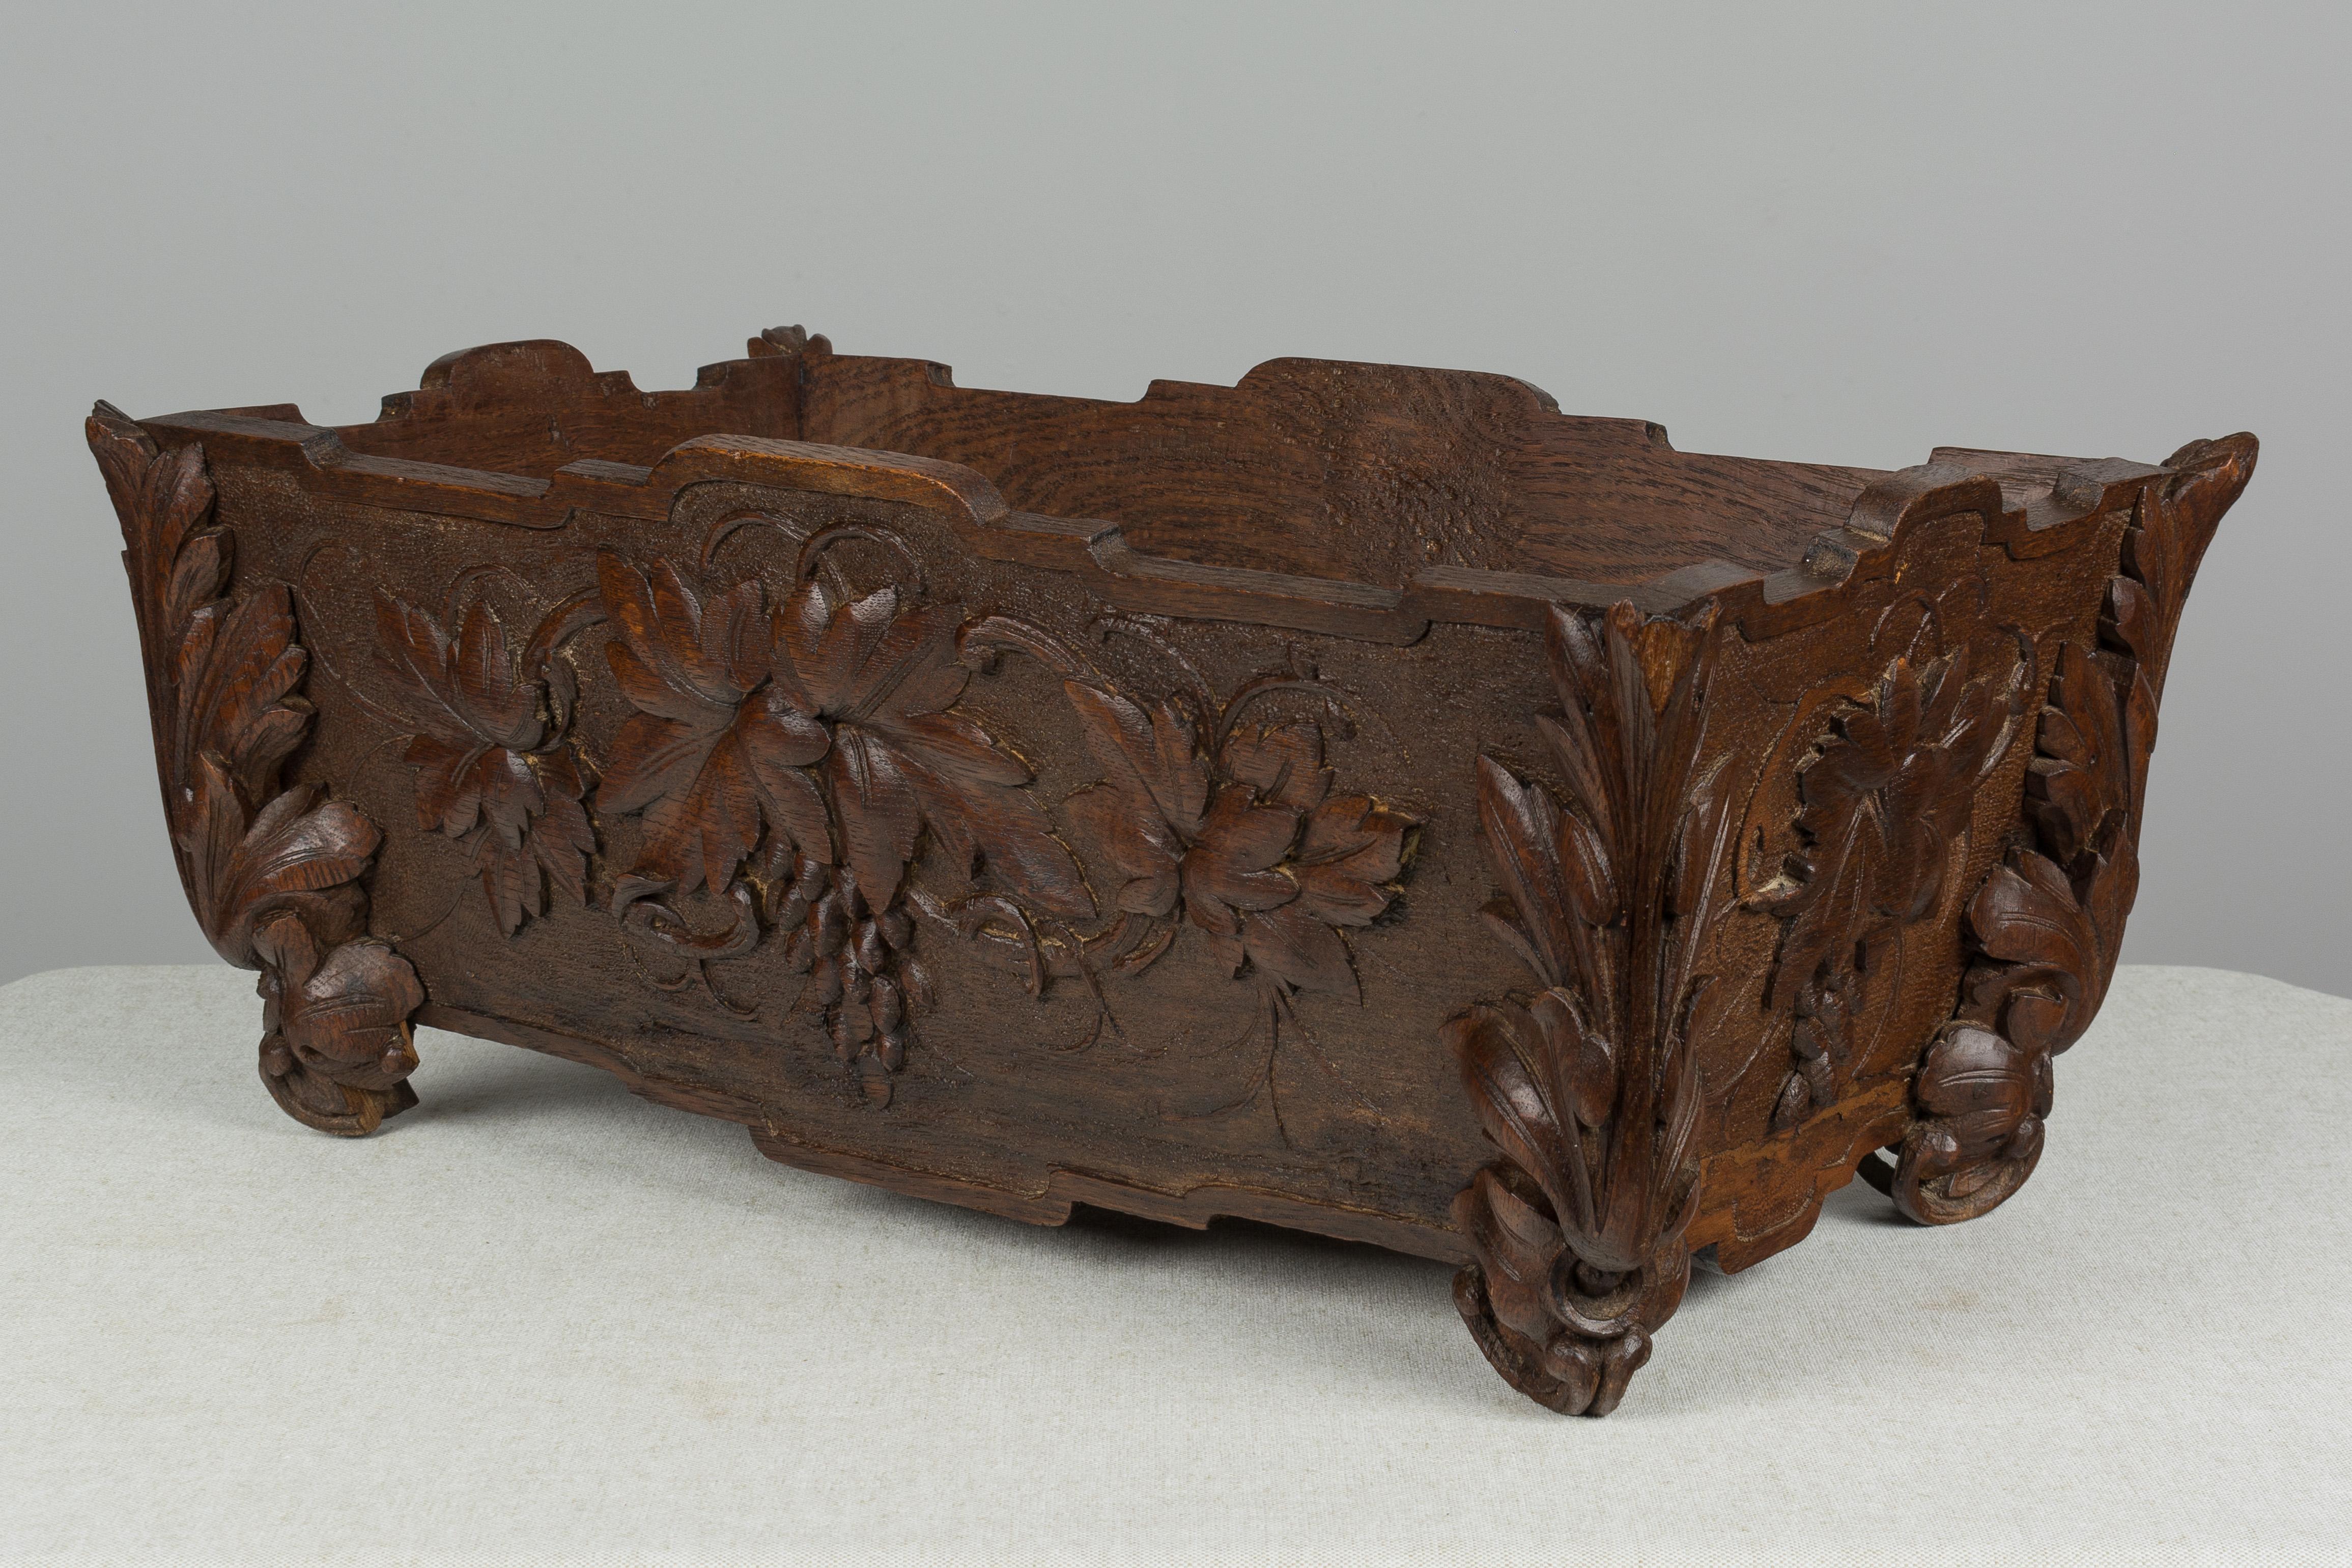 A late 19th century French jardinière or planter made of oak. Beautifully crafted with elaborately carved details including large acanthus leaves on the corners and clusters of grapes on all four sides. Waxed patina. Missing some carvings on the